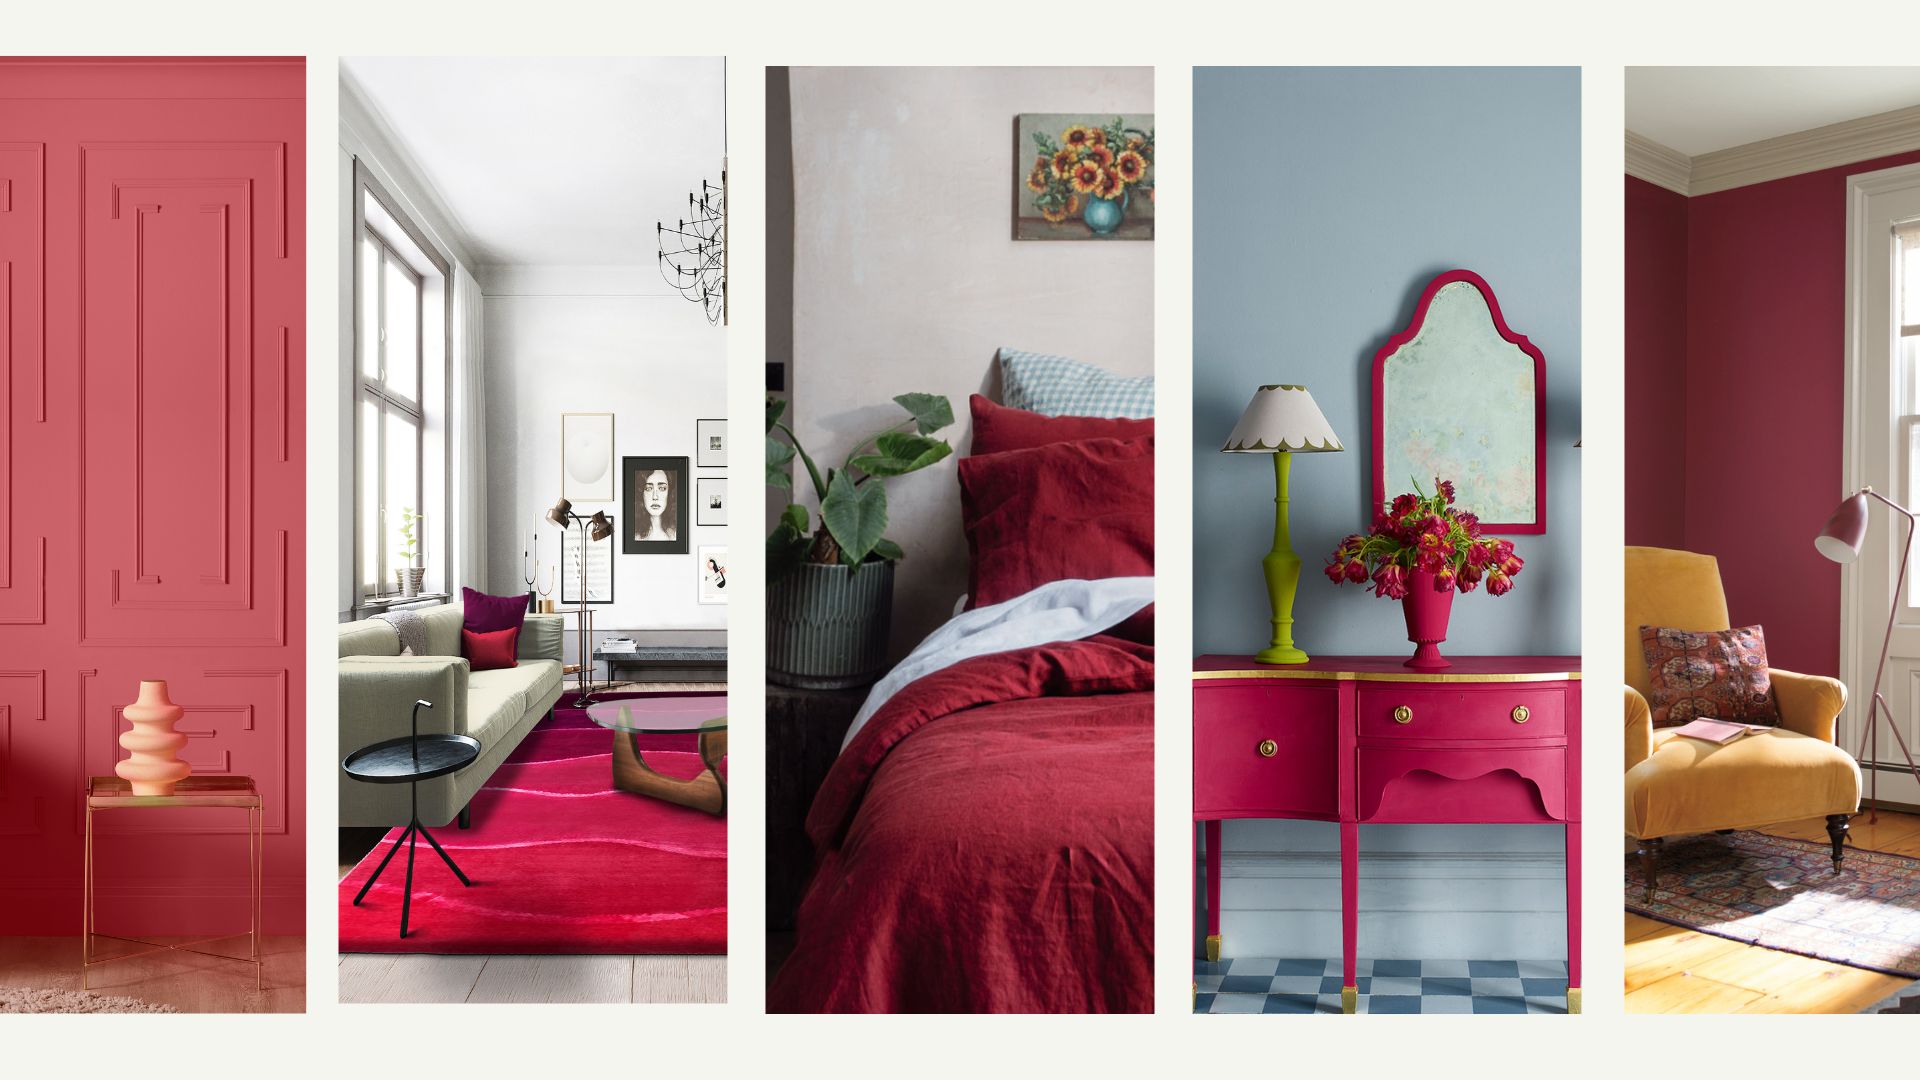 The Pantone Color of the Year 2023: Viva Magenta - Product +